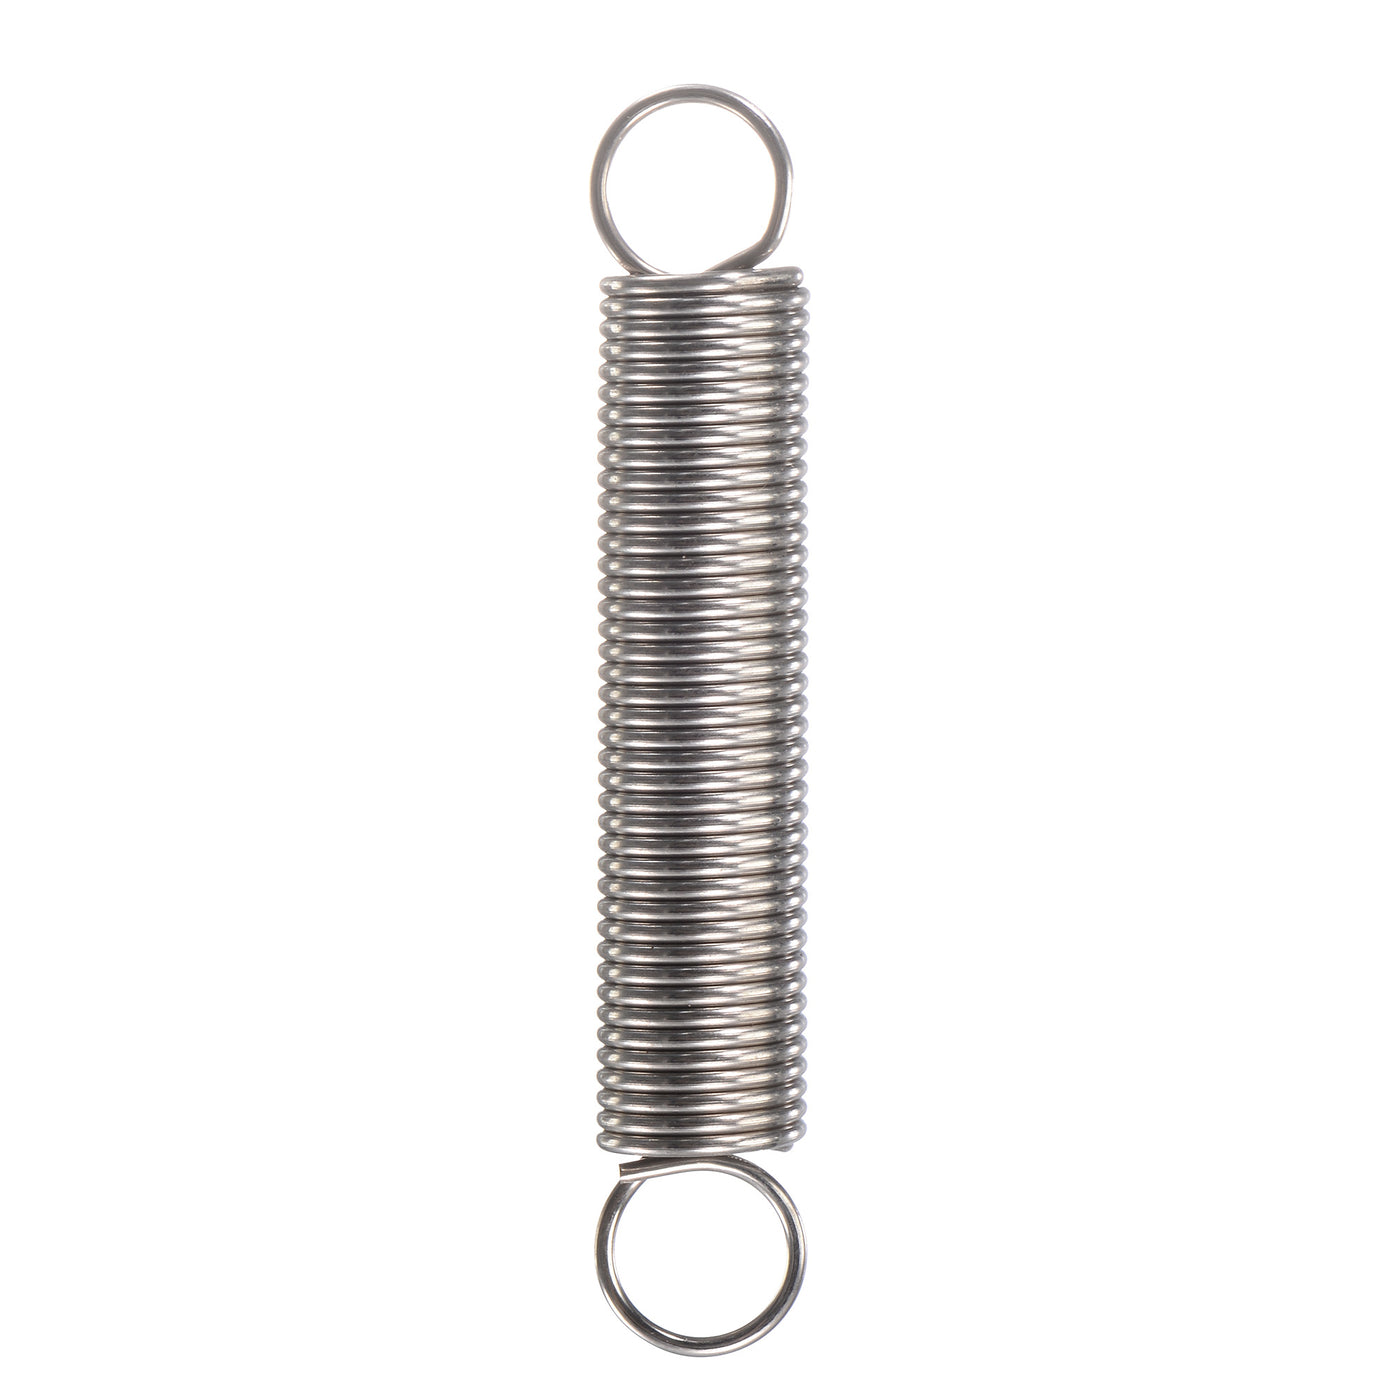 Uxcell Uxcell 1mmx10mmx50mm Extended Compression Spring,3.4Lbs Load Capacity,Silver,5pcs